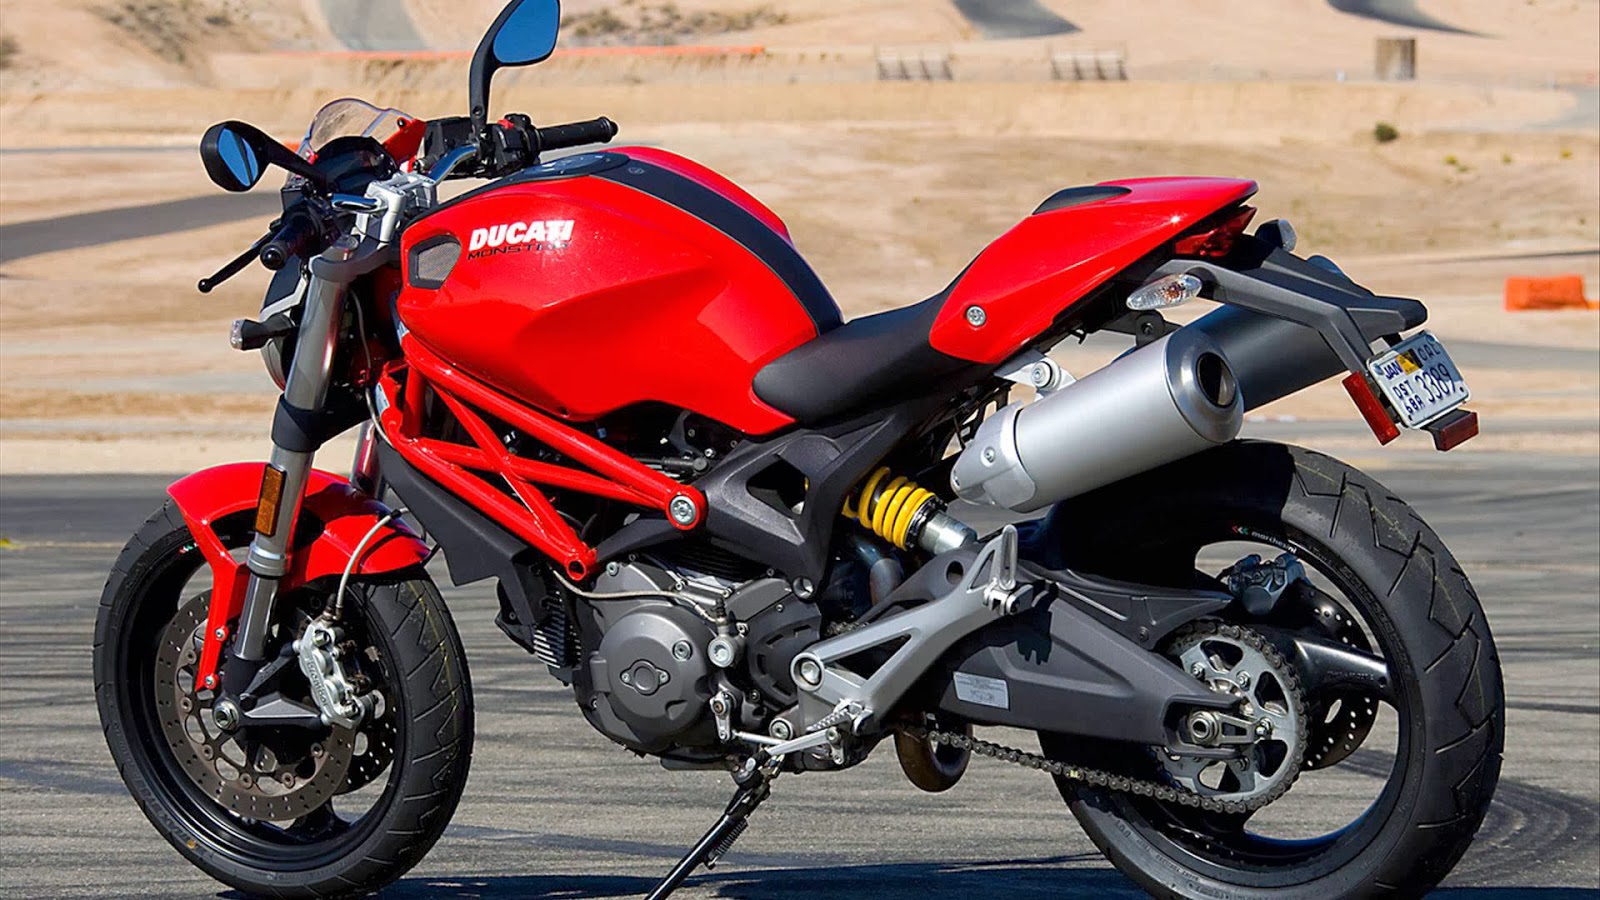 2012 Ducati Monster 696 We Obsessively Cover the Auto